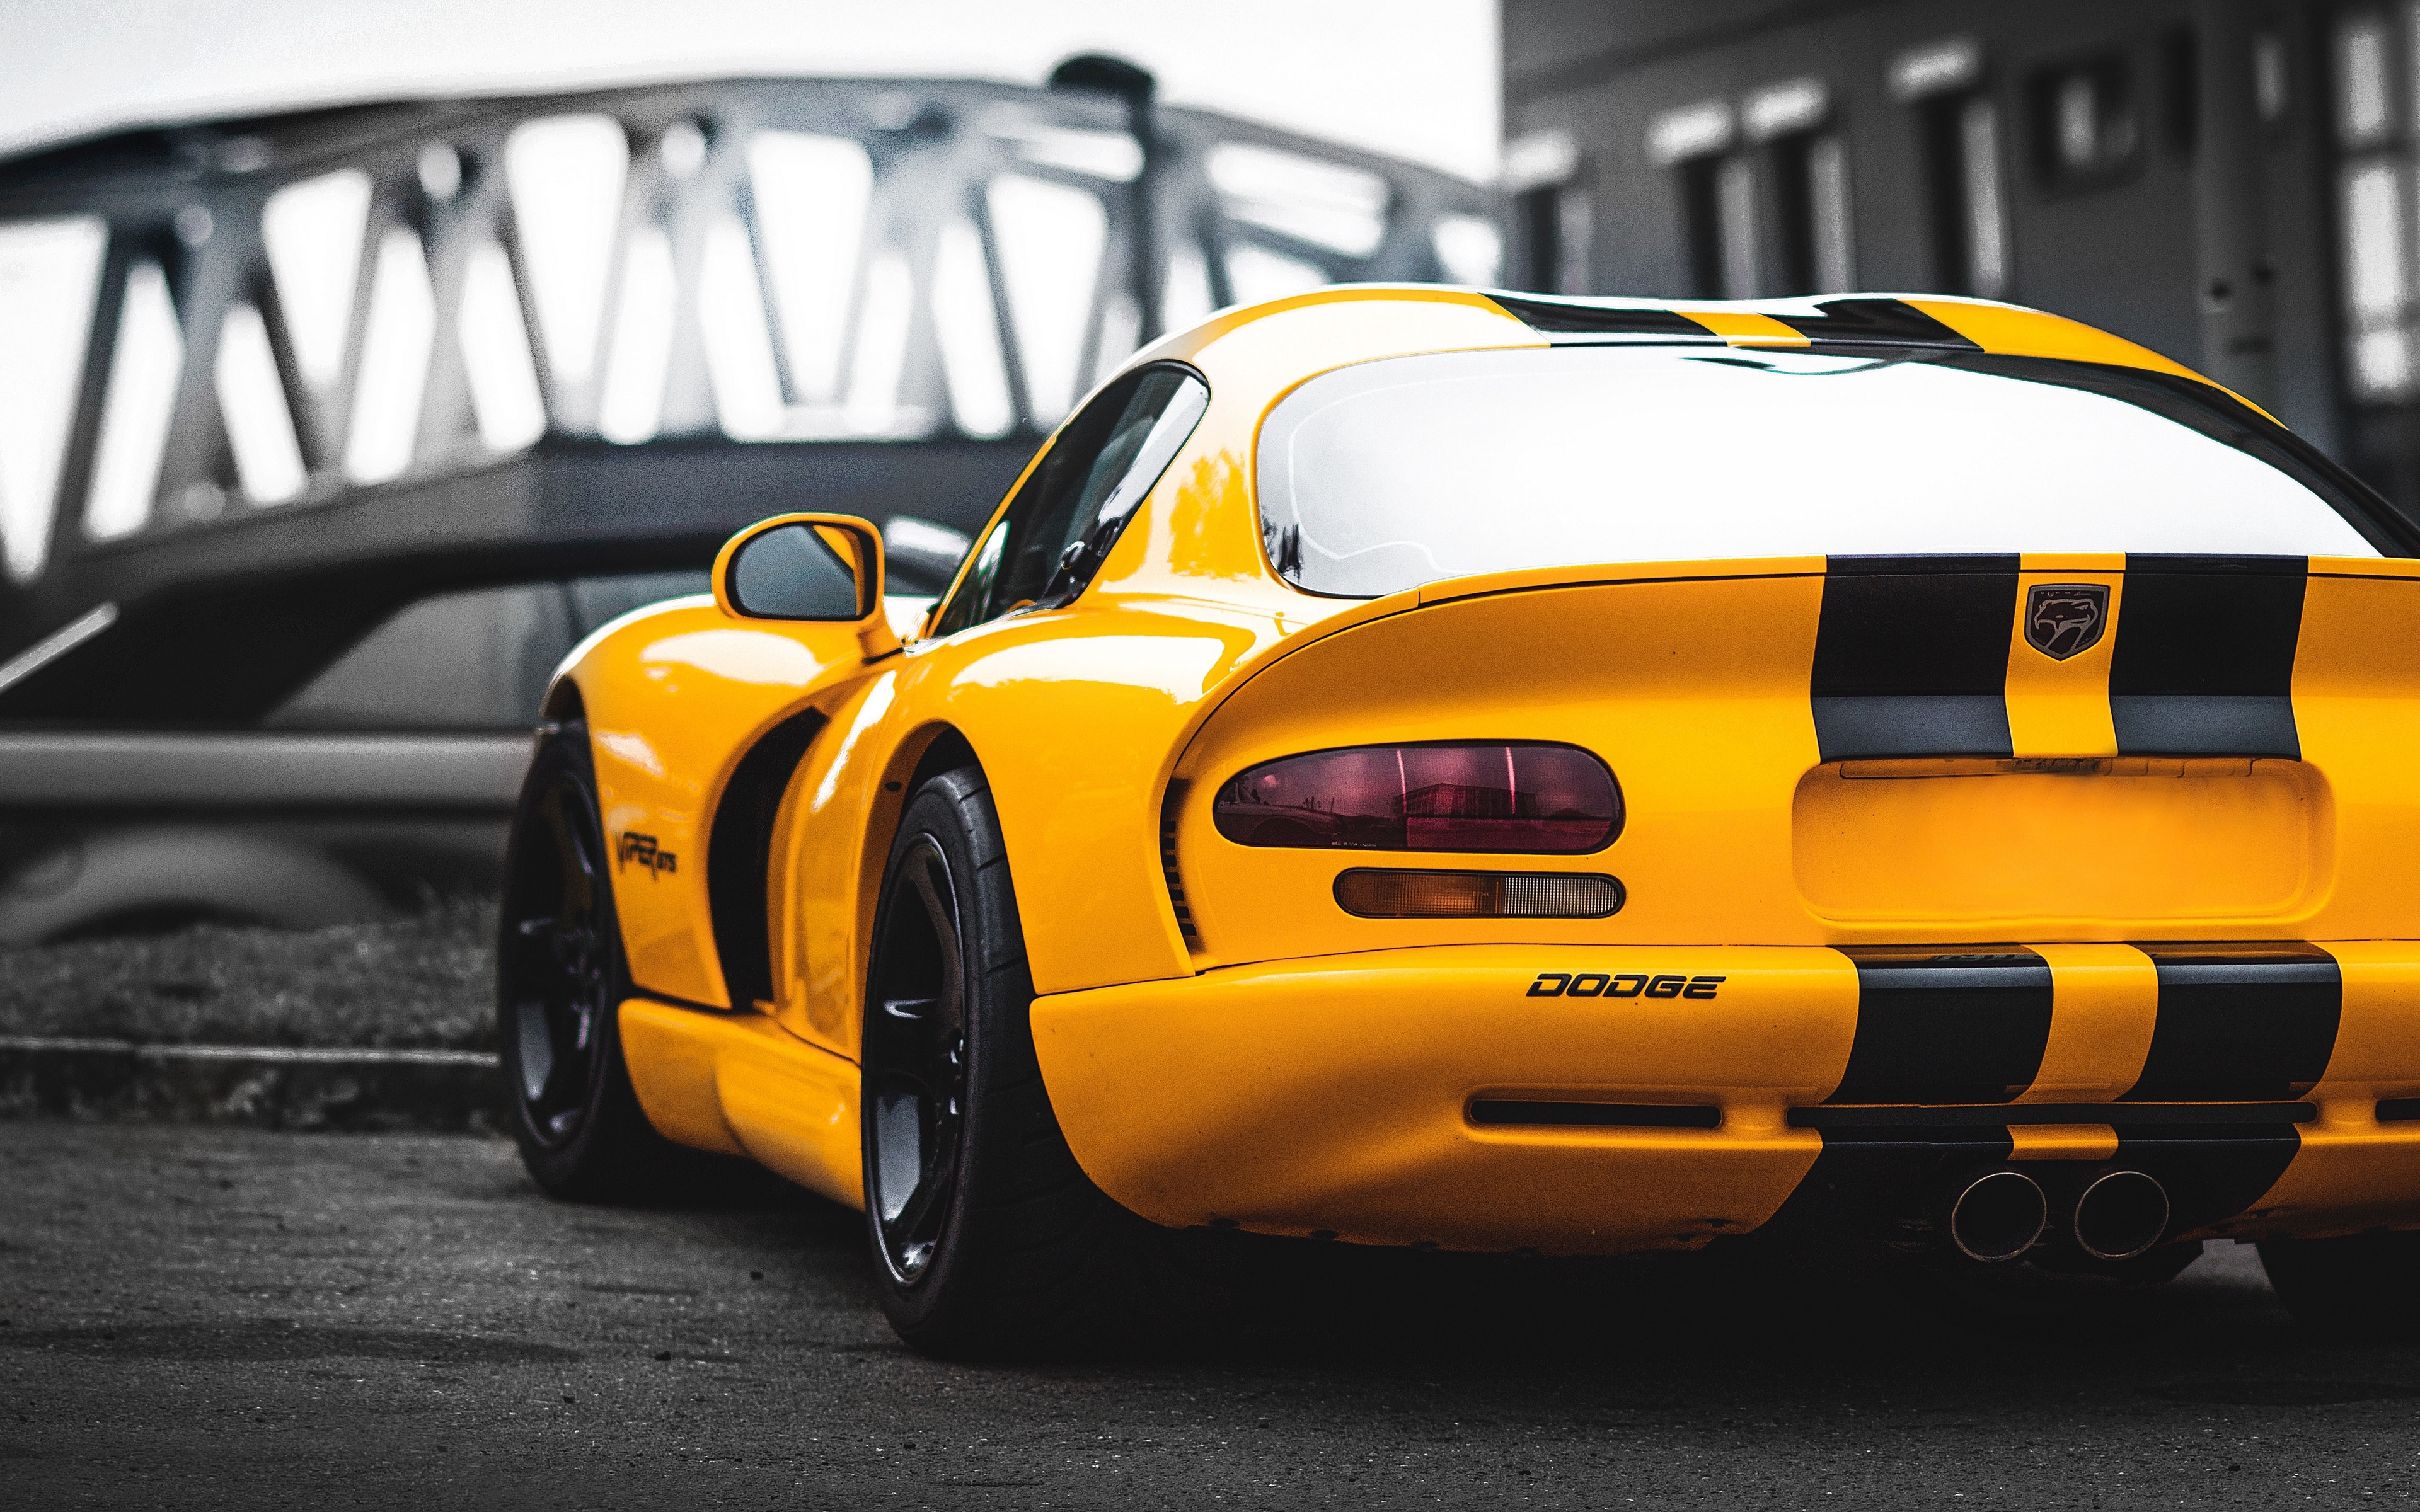 Wallpapers muscle cars view from behind wallpaper dodge viper on the desktop